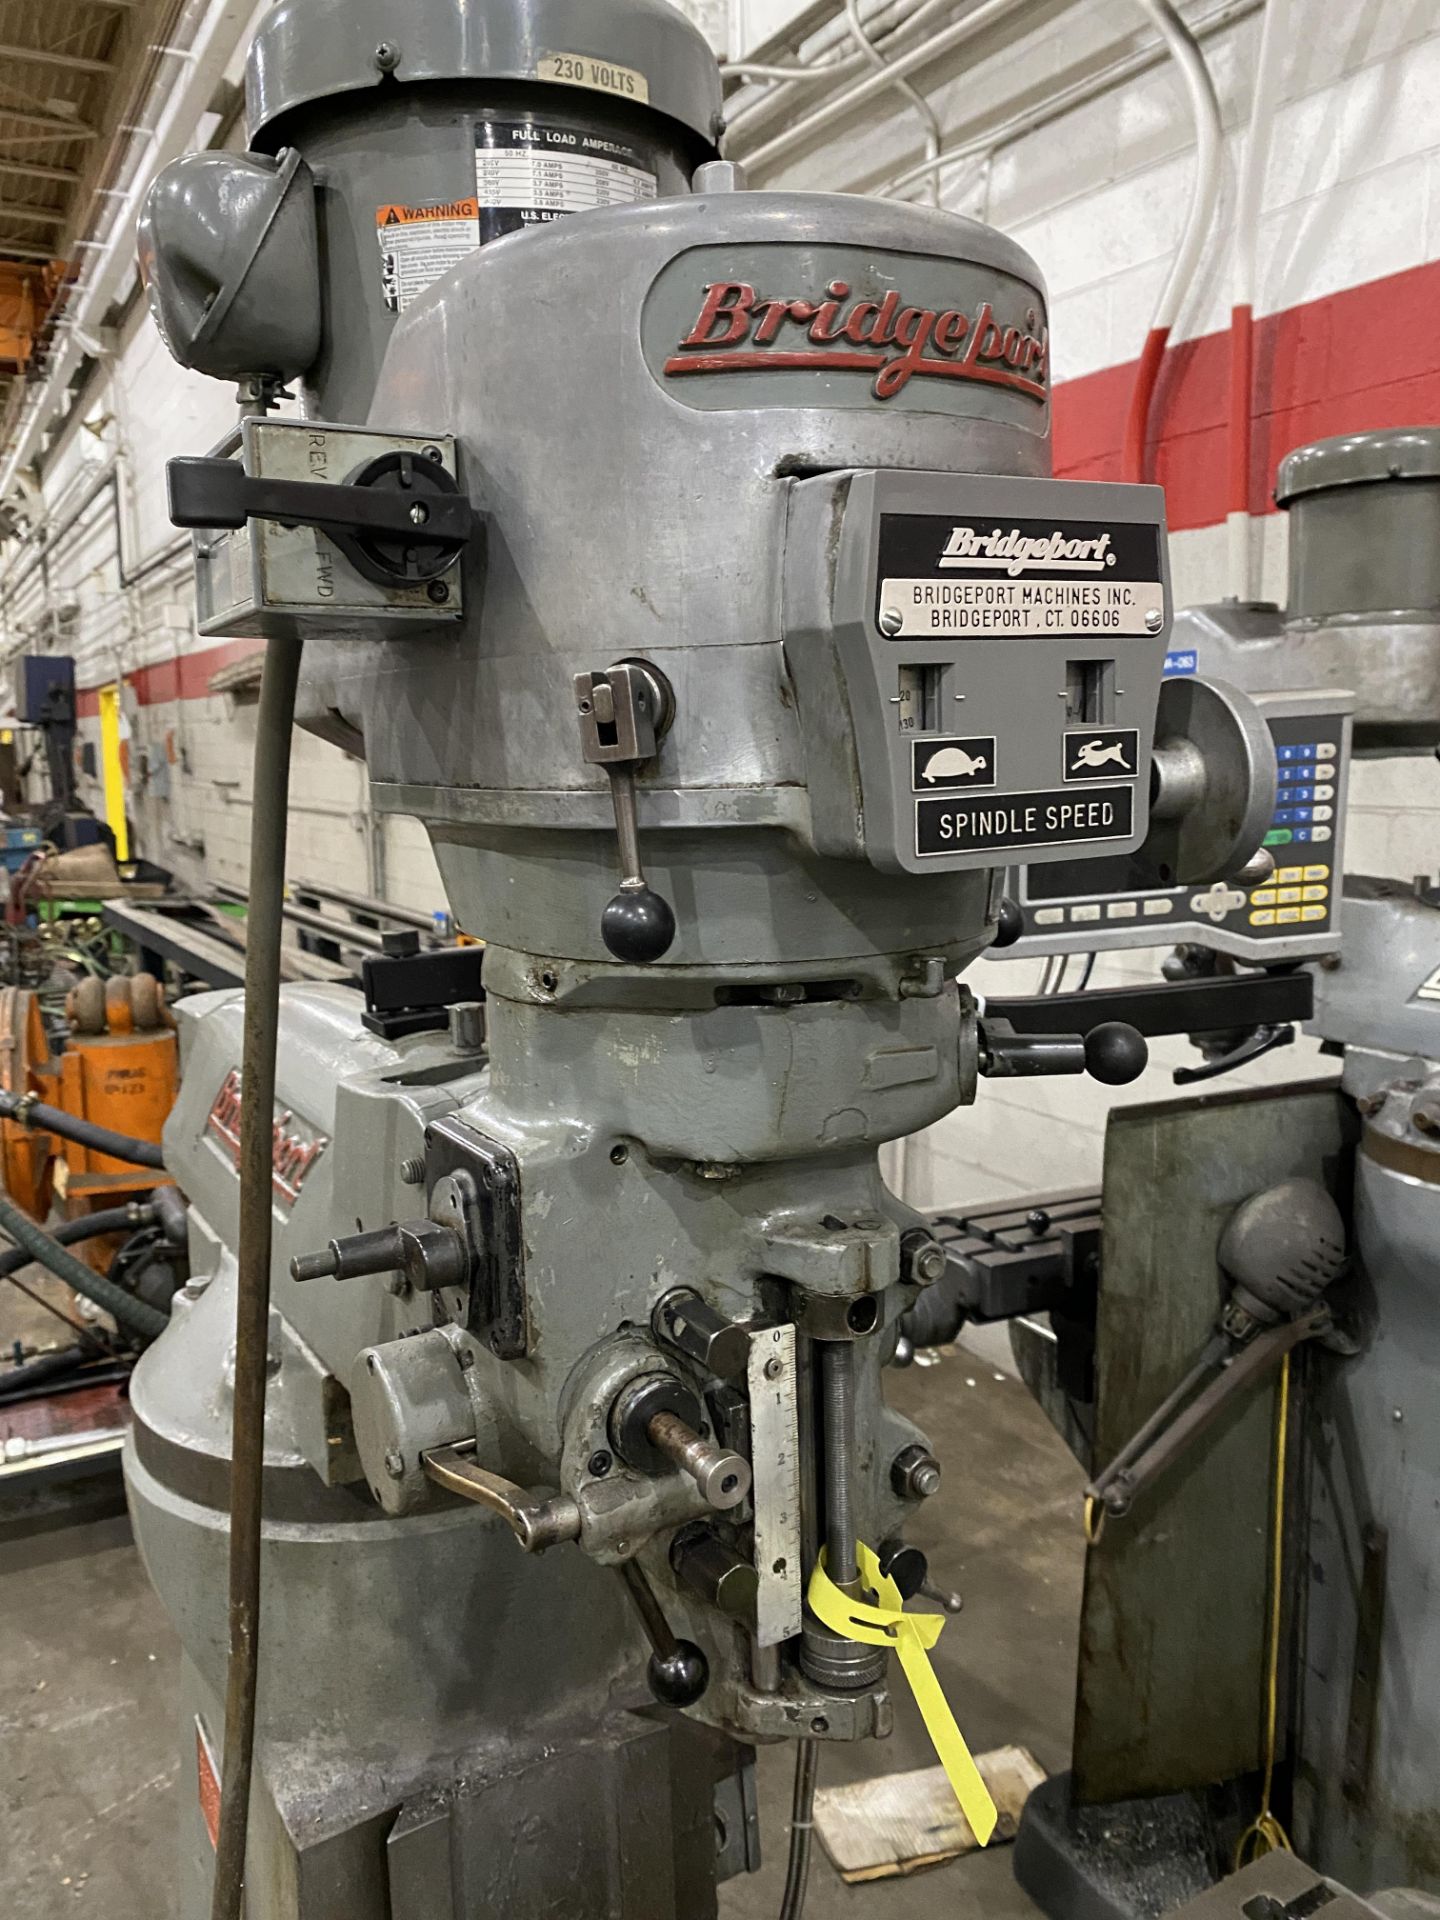 Bridgeport Series I Vertical Mill, 9" x 48", Variable Speed w/DRO - Image 10 of 10